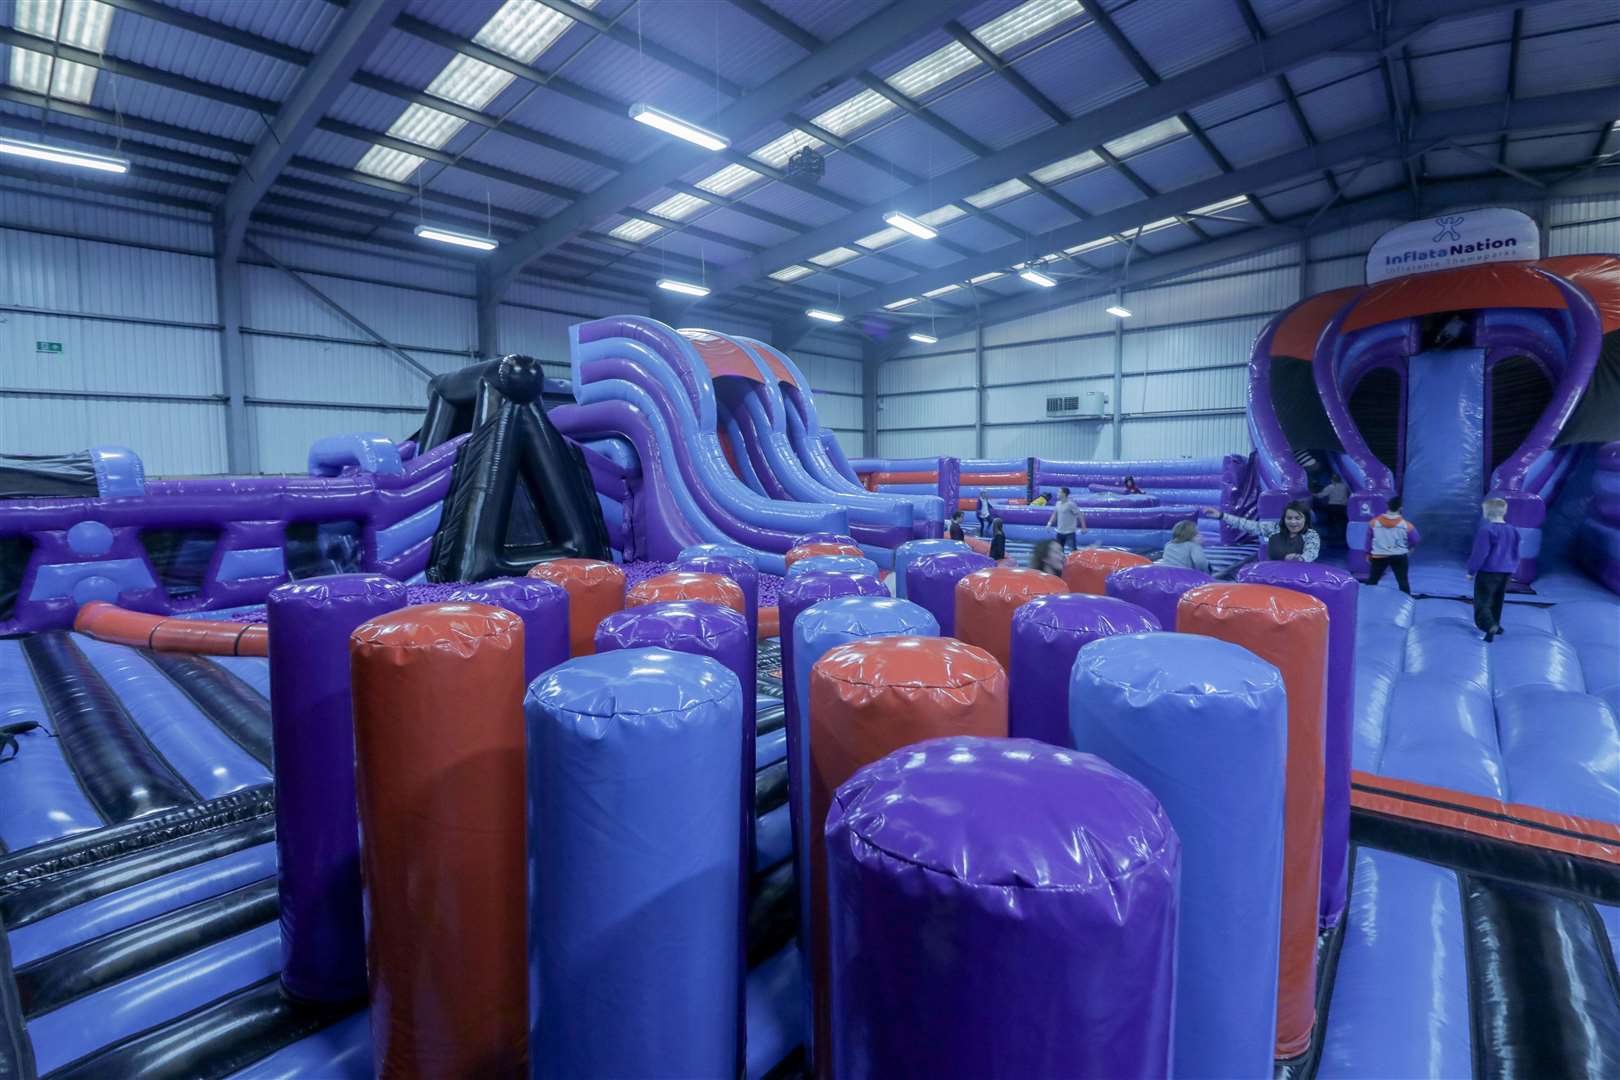 Inflata Nation, which open in Cardinal Park, Ipswich, where former nightclub Unit 17 used to be, will open on Wednesday, December 27.